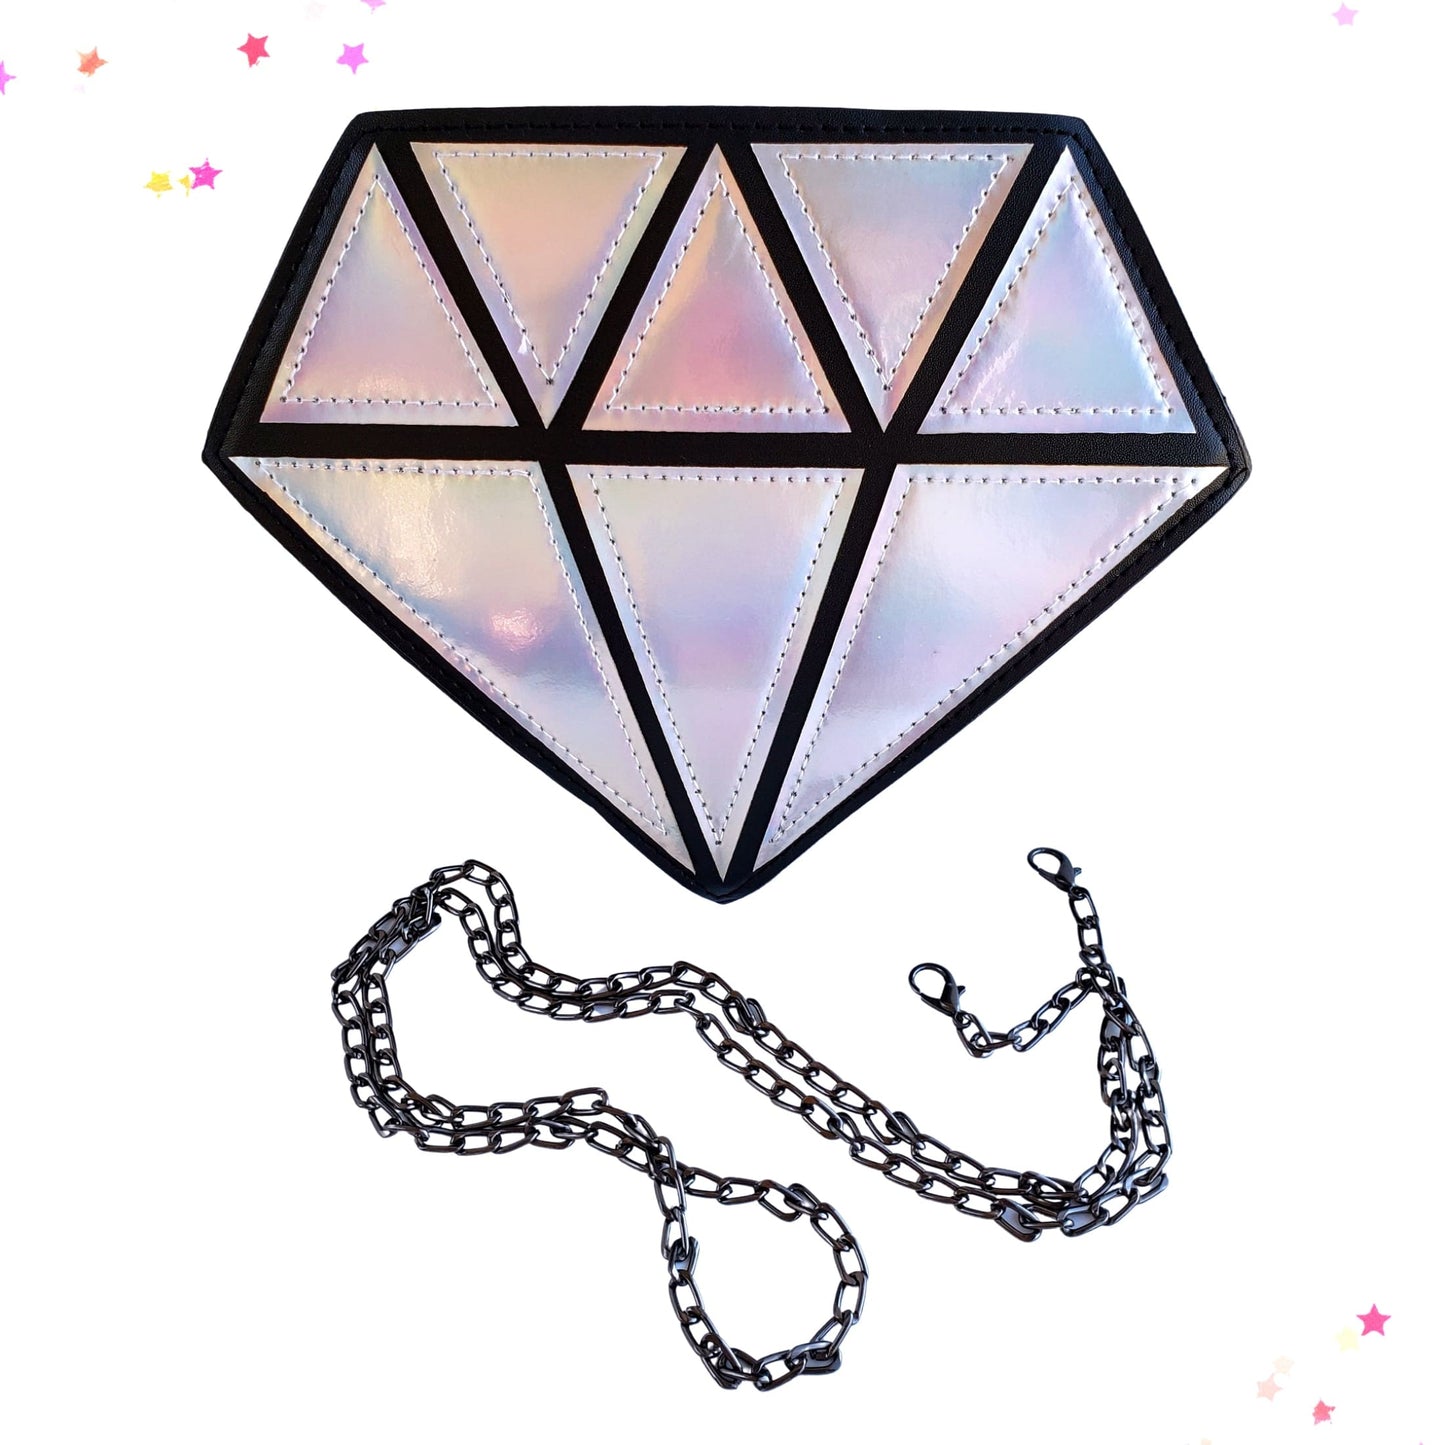 Iridescent Diamond Sling Bag from Confetti Kitty, Only 12.99